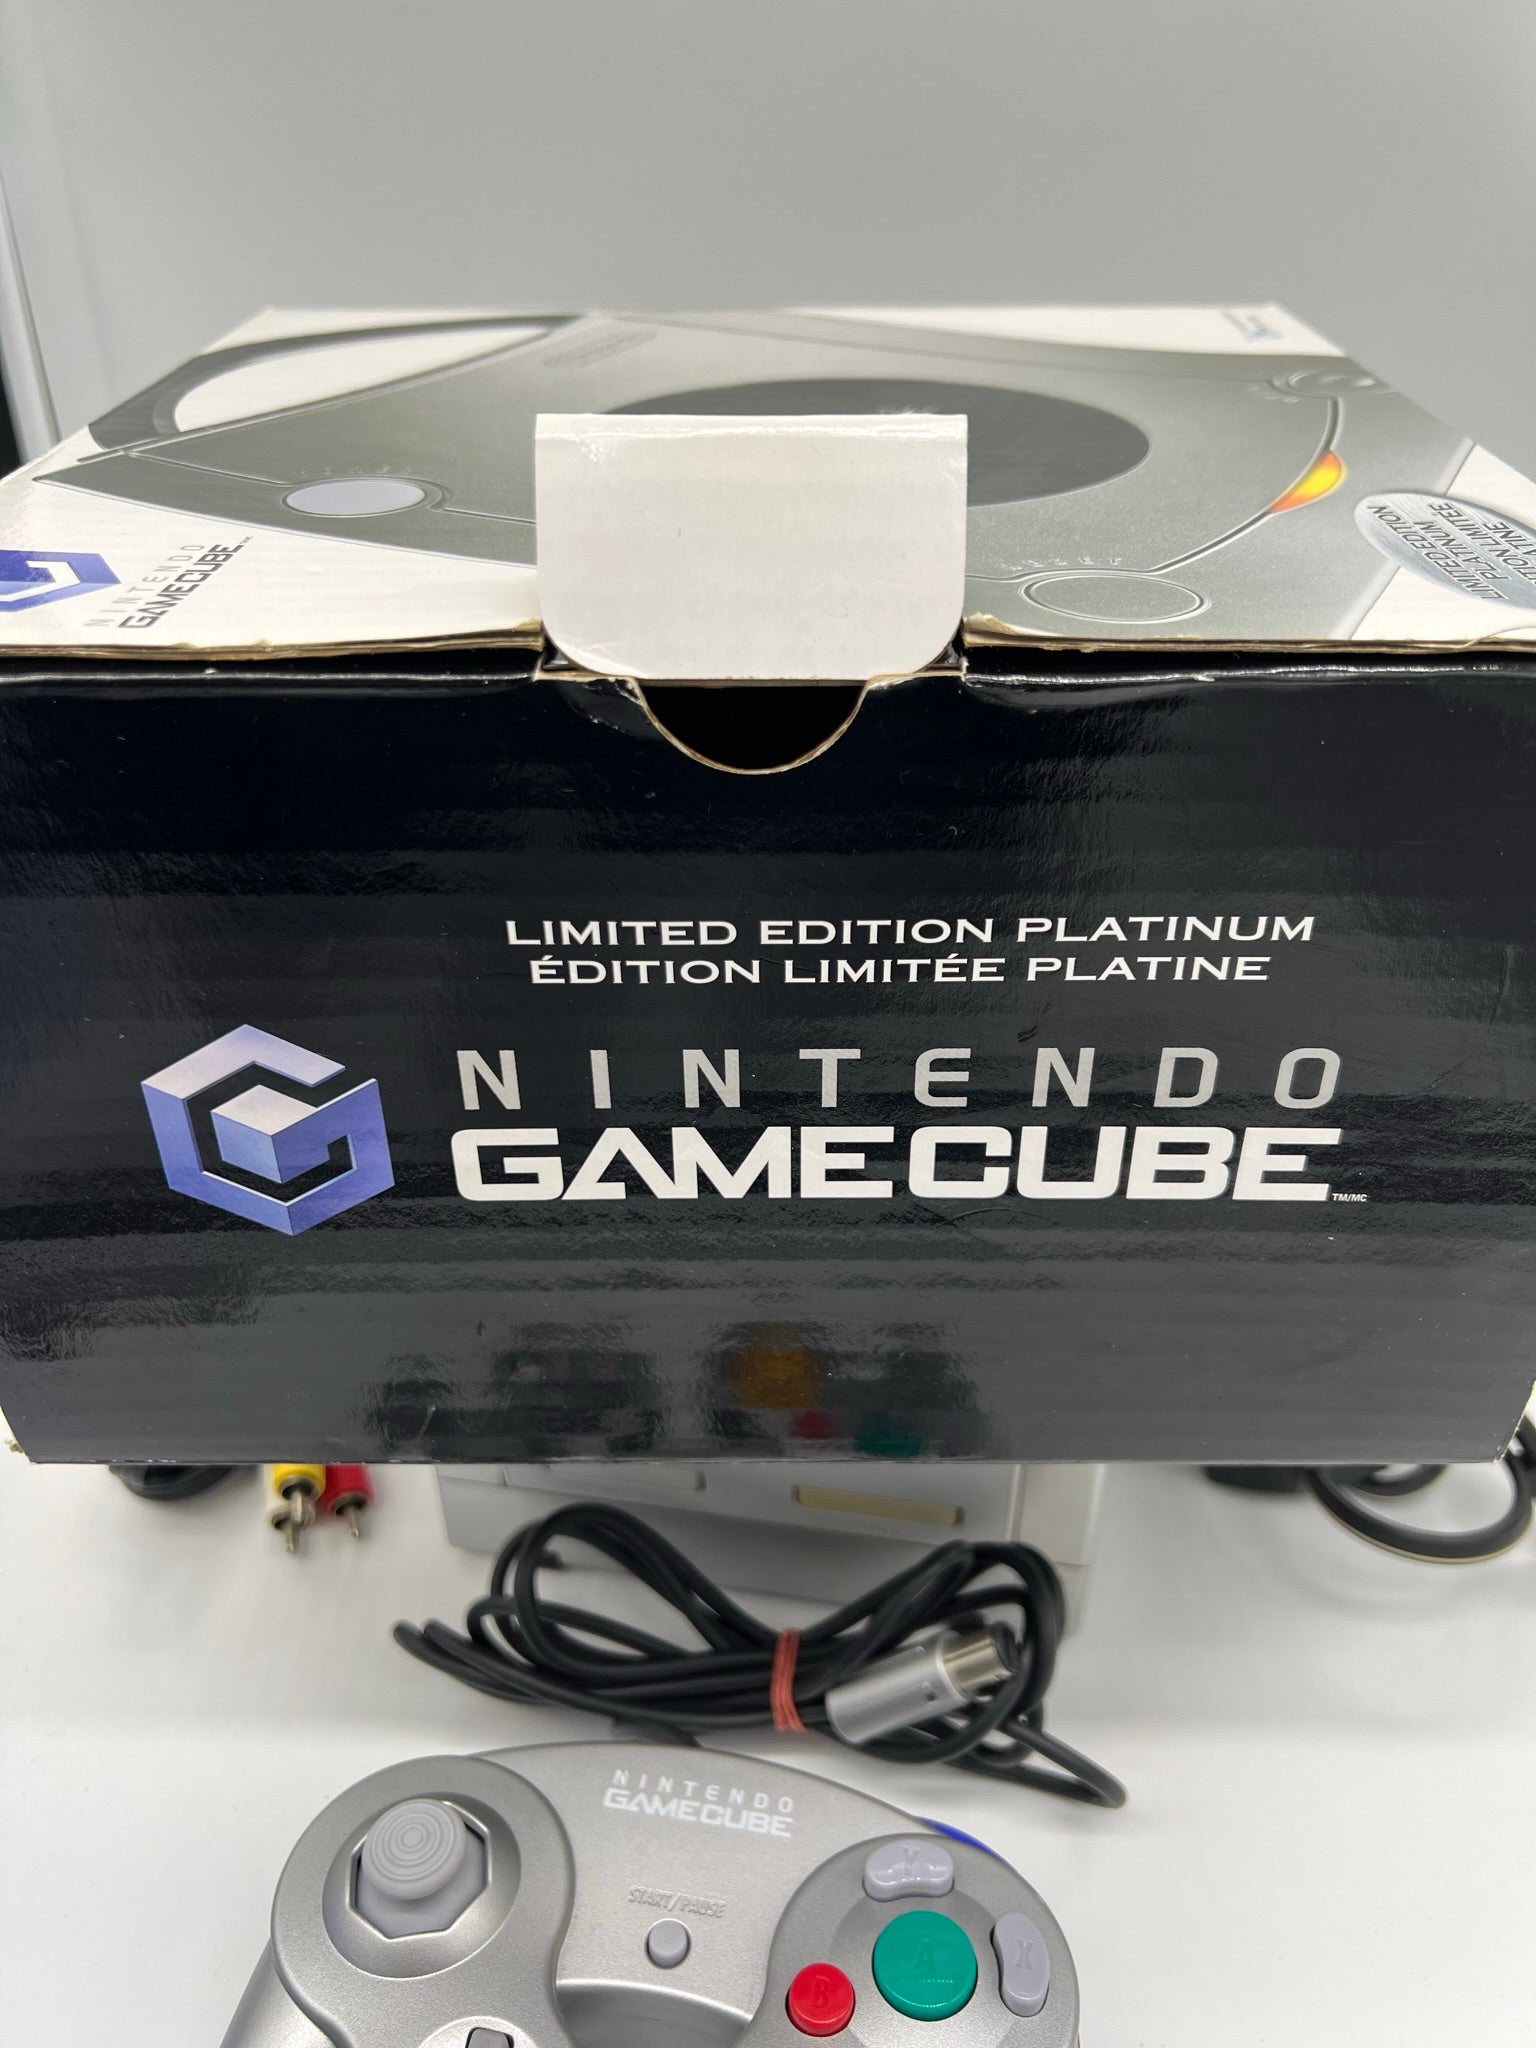 Gamecube Platine (Game cube Silver) - Consoles